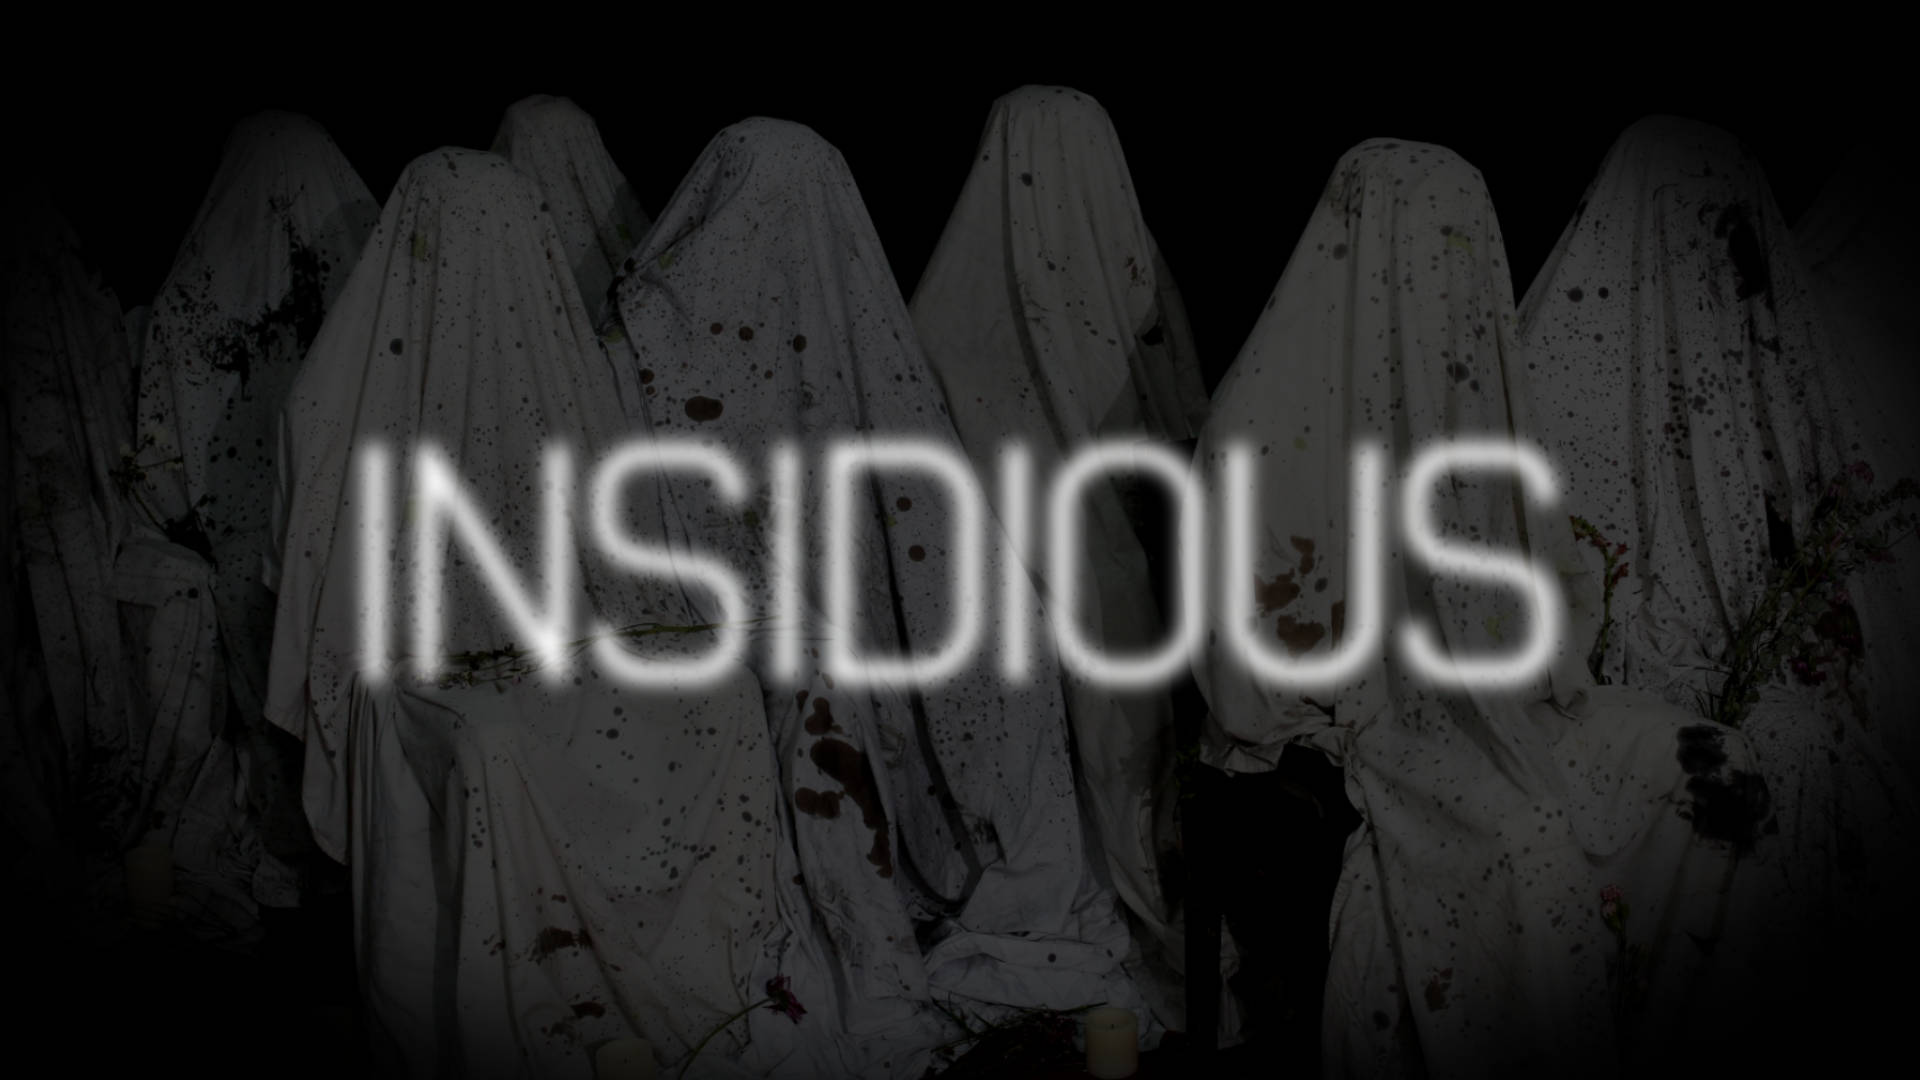 Insidious Pictures Wallpaper